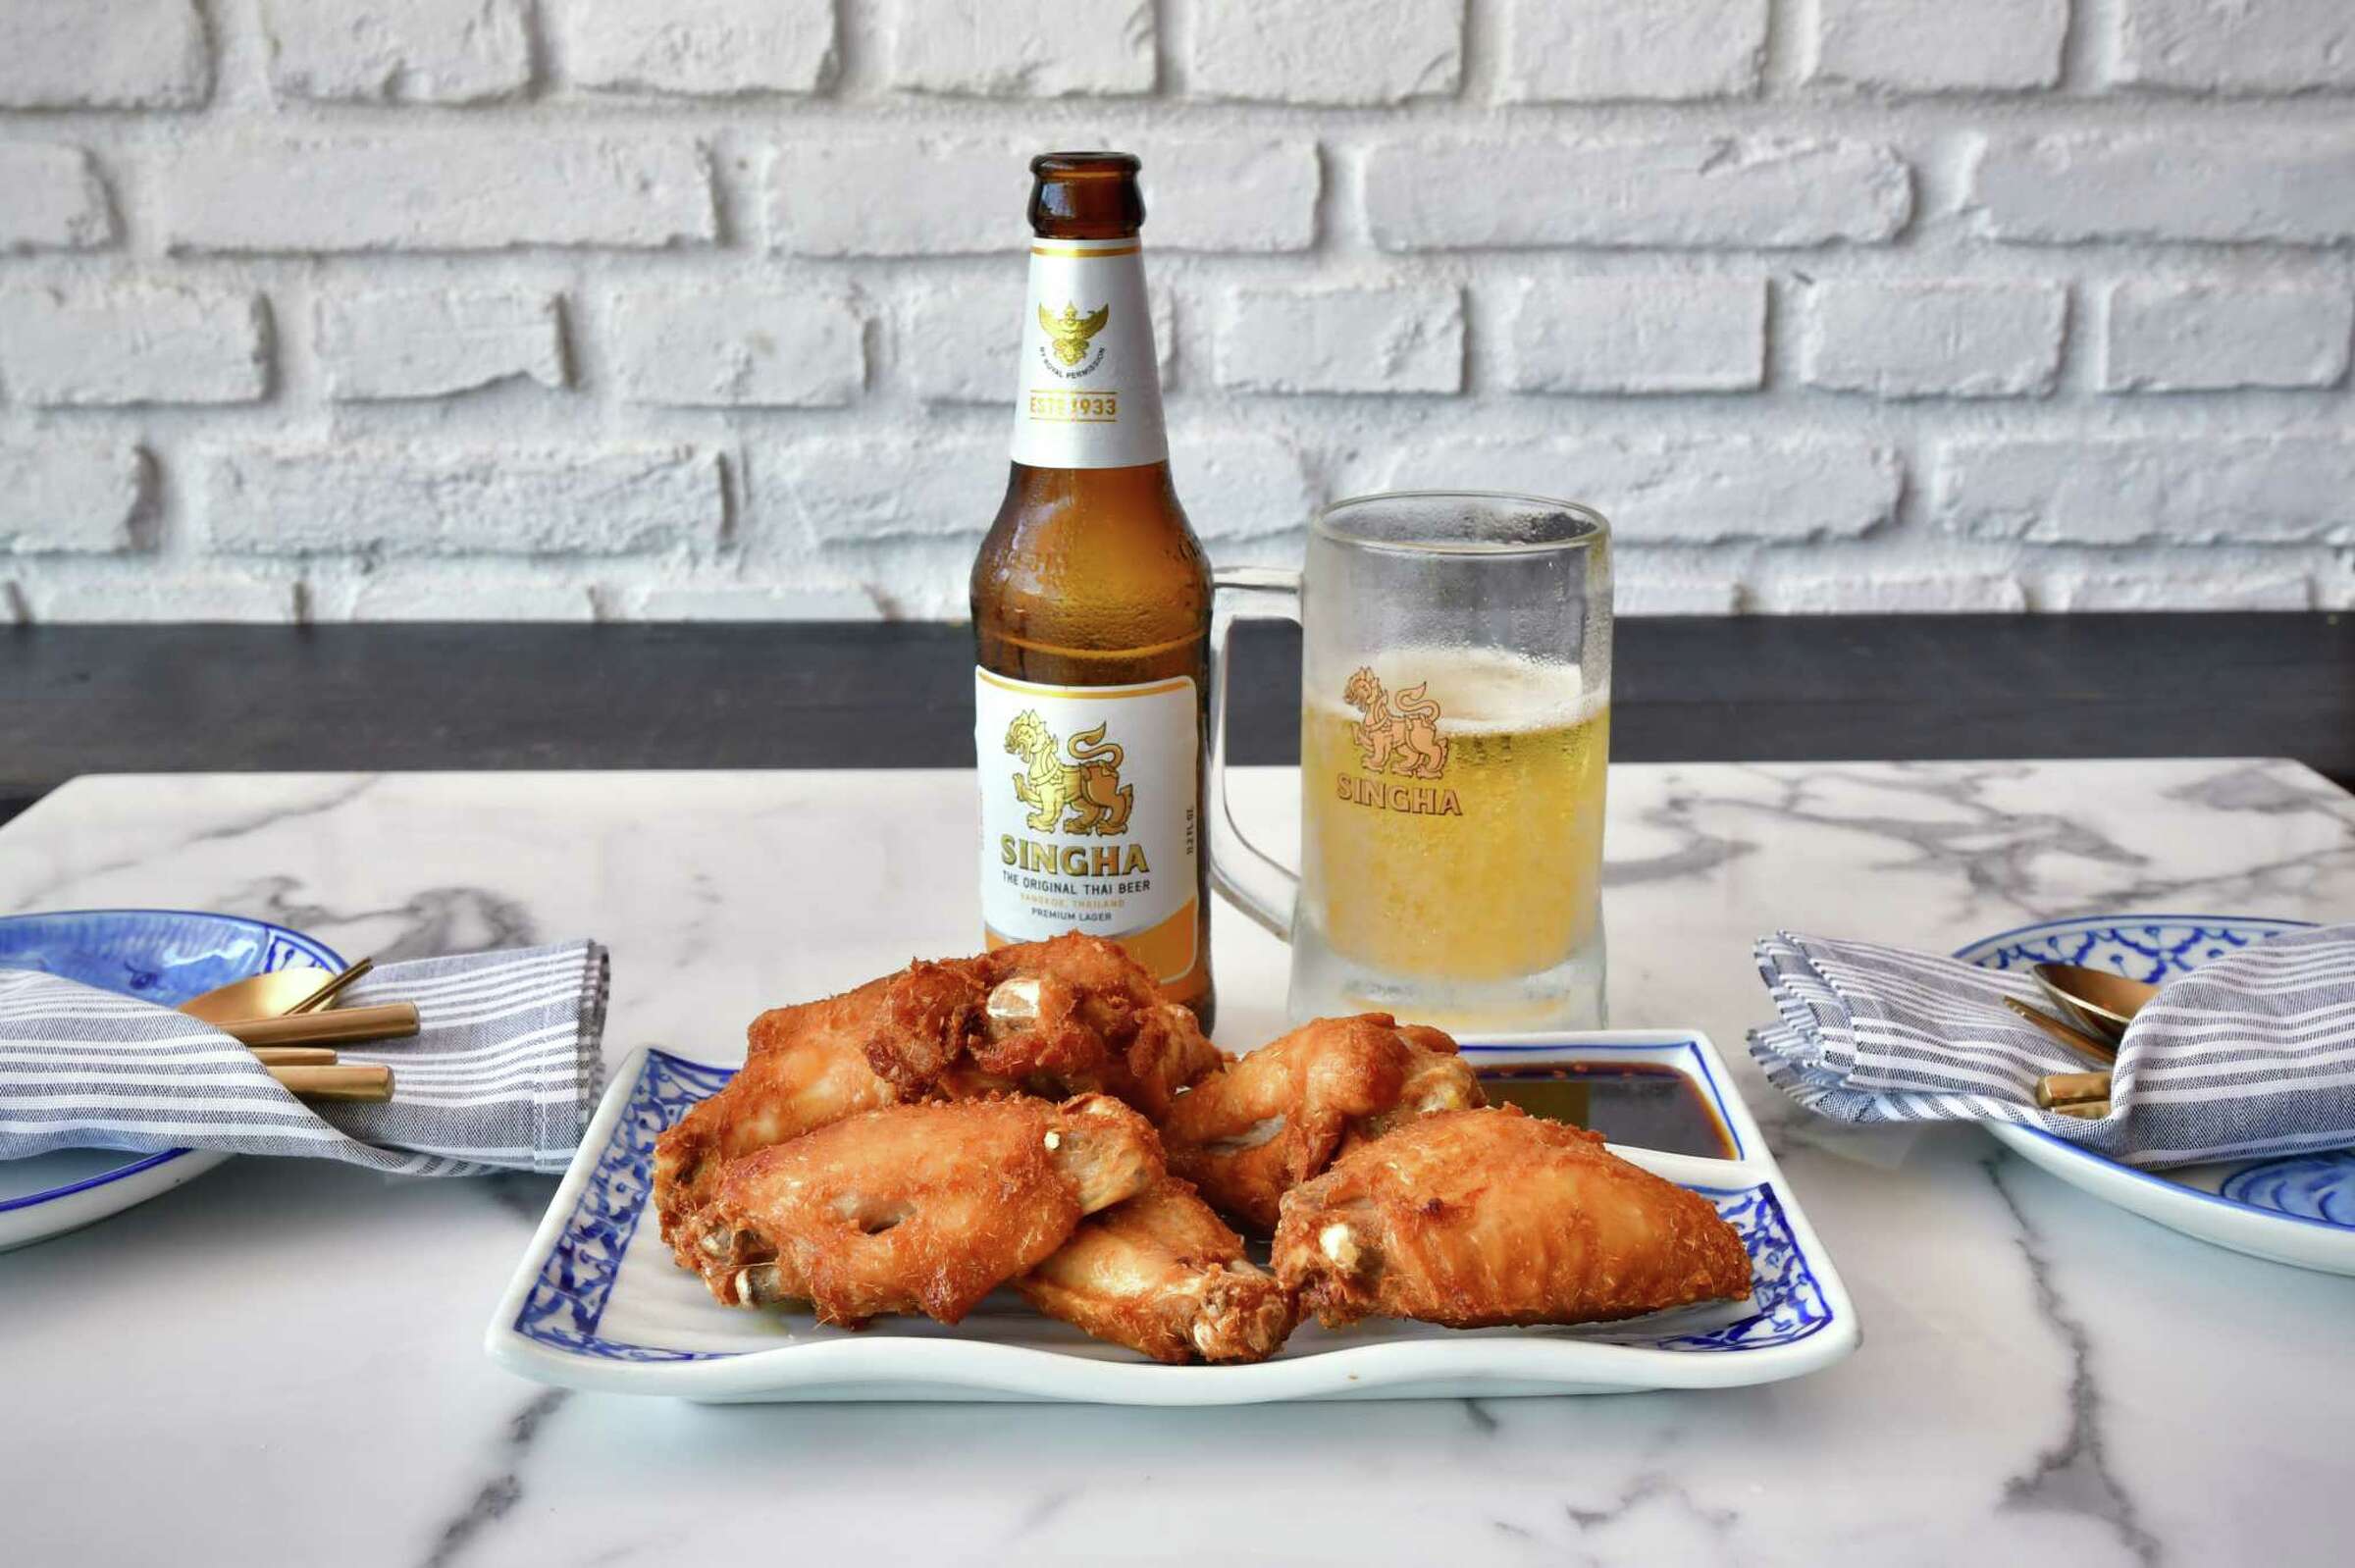 Fried chicken with beer in the background